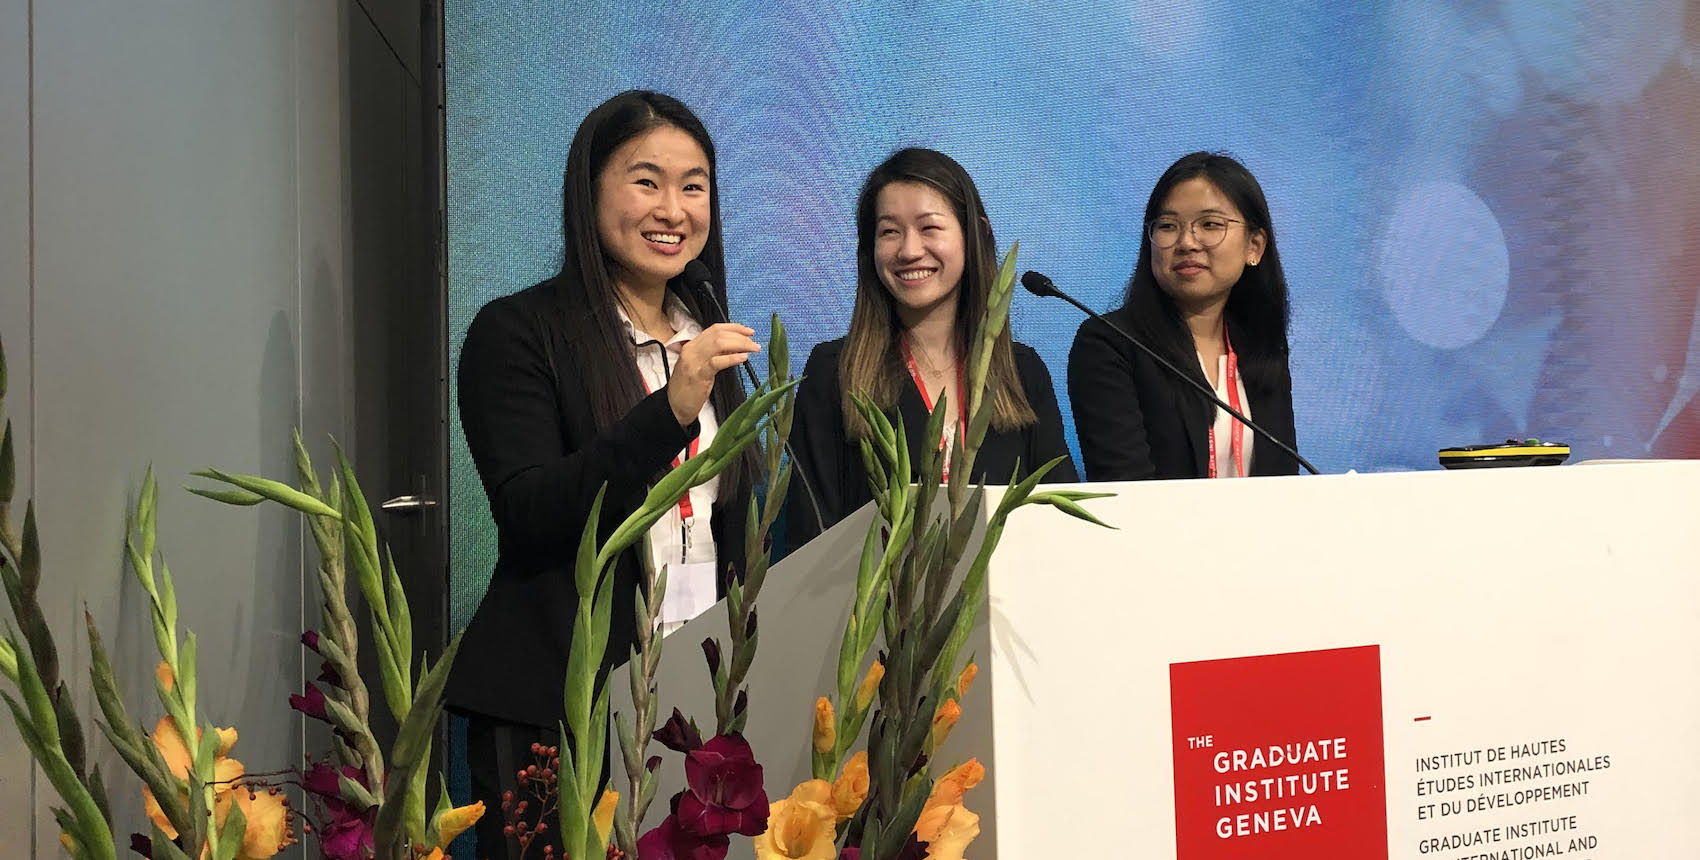 Michelle Dong and teammates at the Geneva Challenge conference